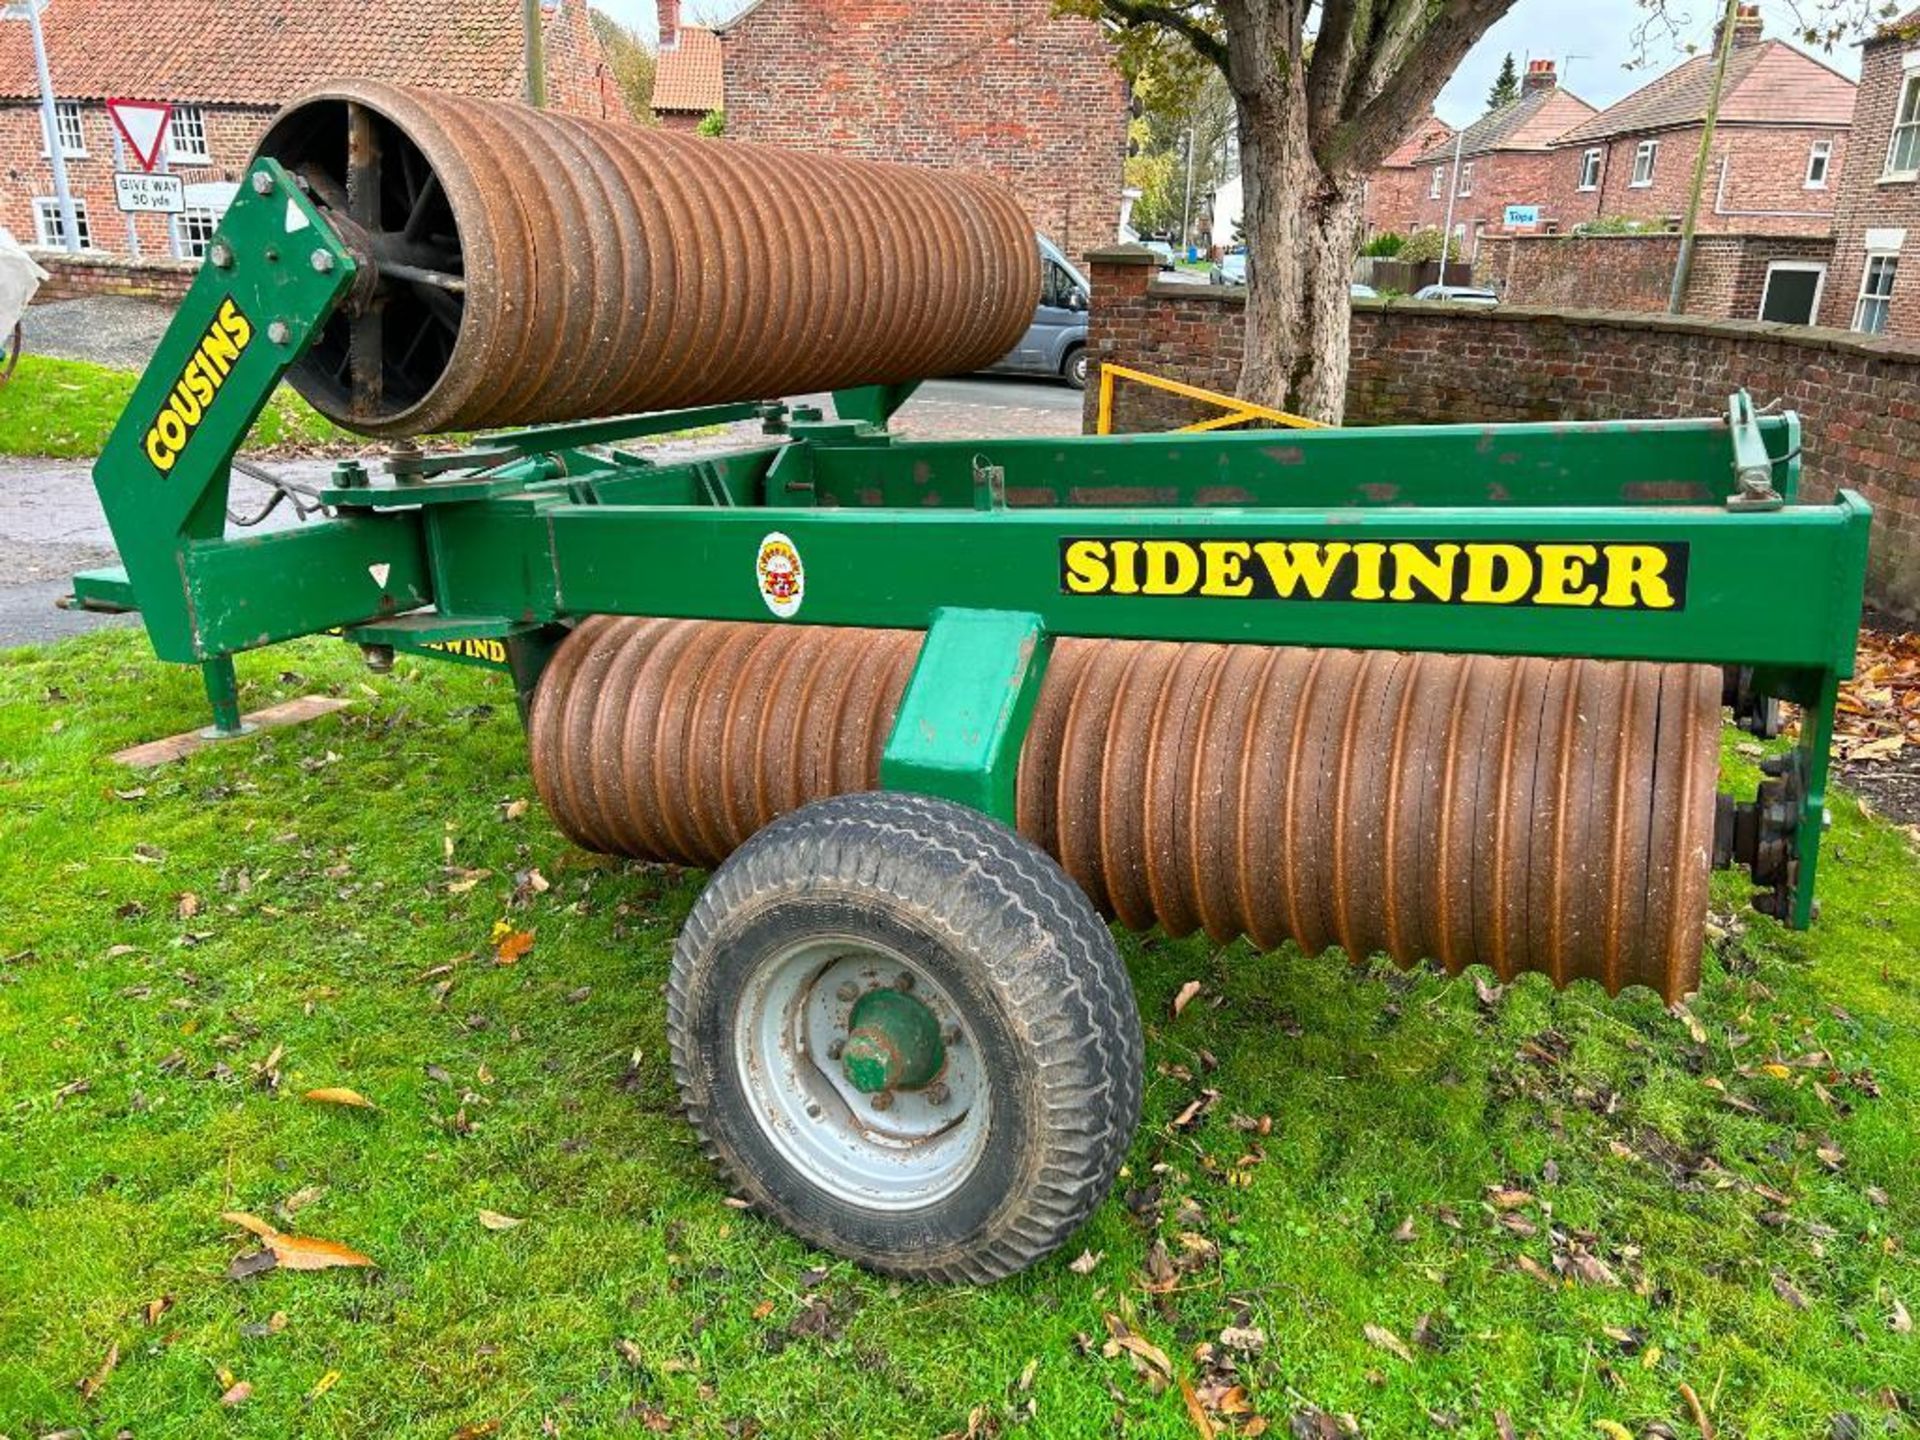 1996 Cousins 6.2m Sidewinder hydraulic folding Cambridge rolls Manual in the office - Image 3 of 10